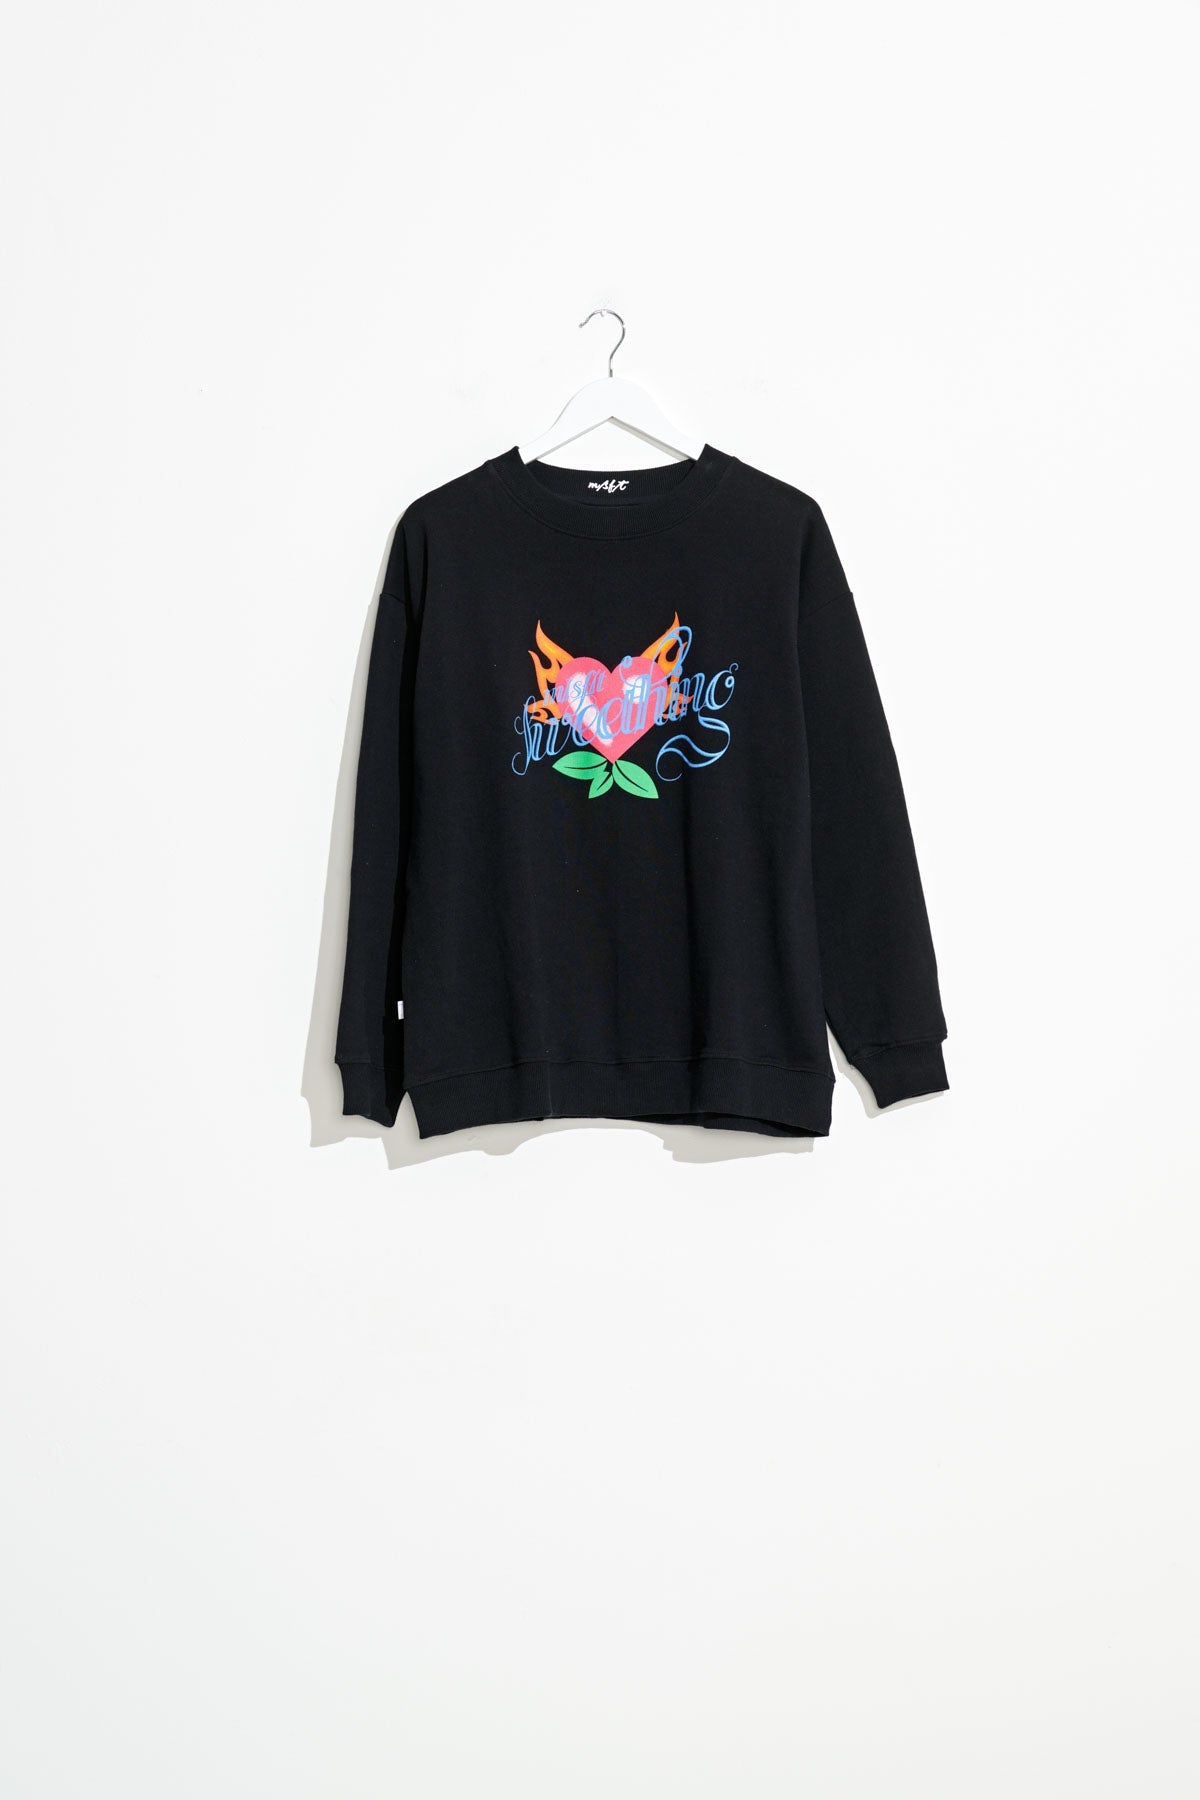 Misfit Shapes - Sweet Thing OS Crew - Black